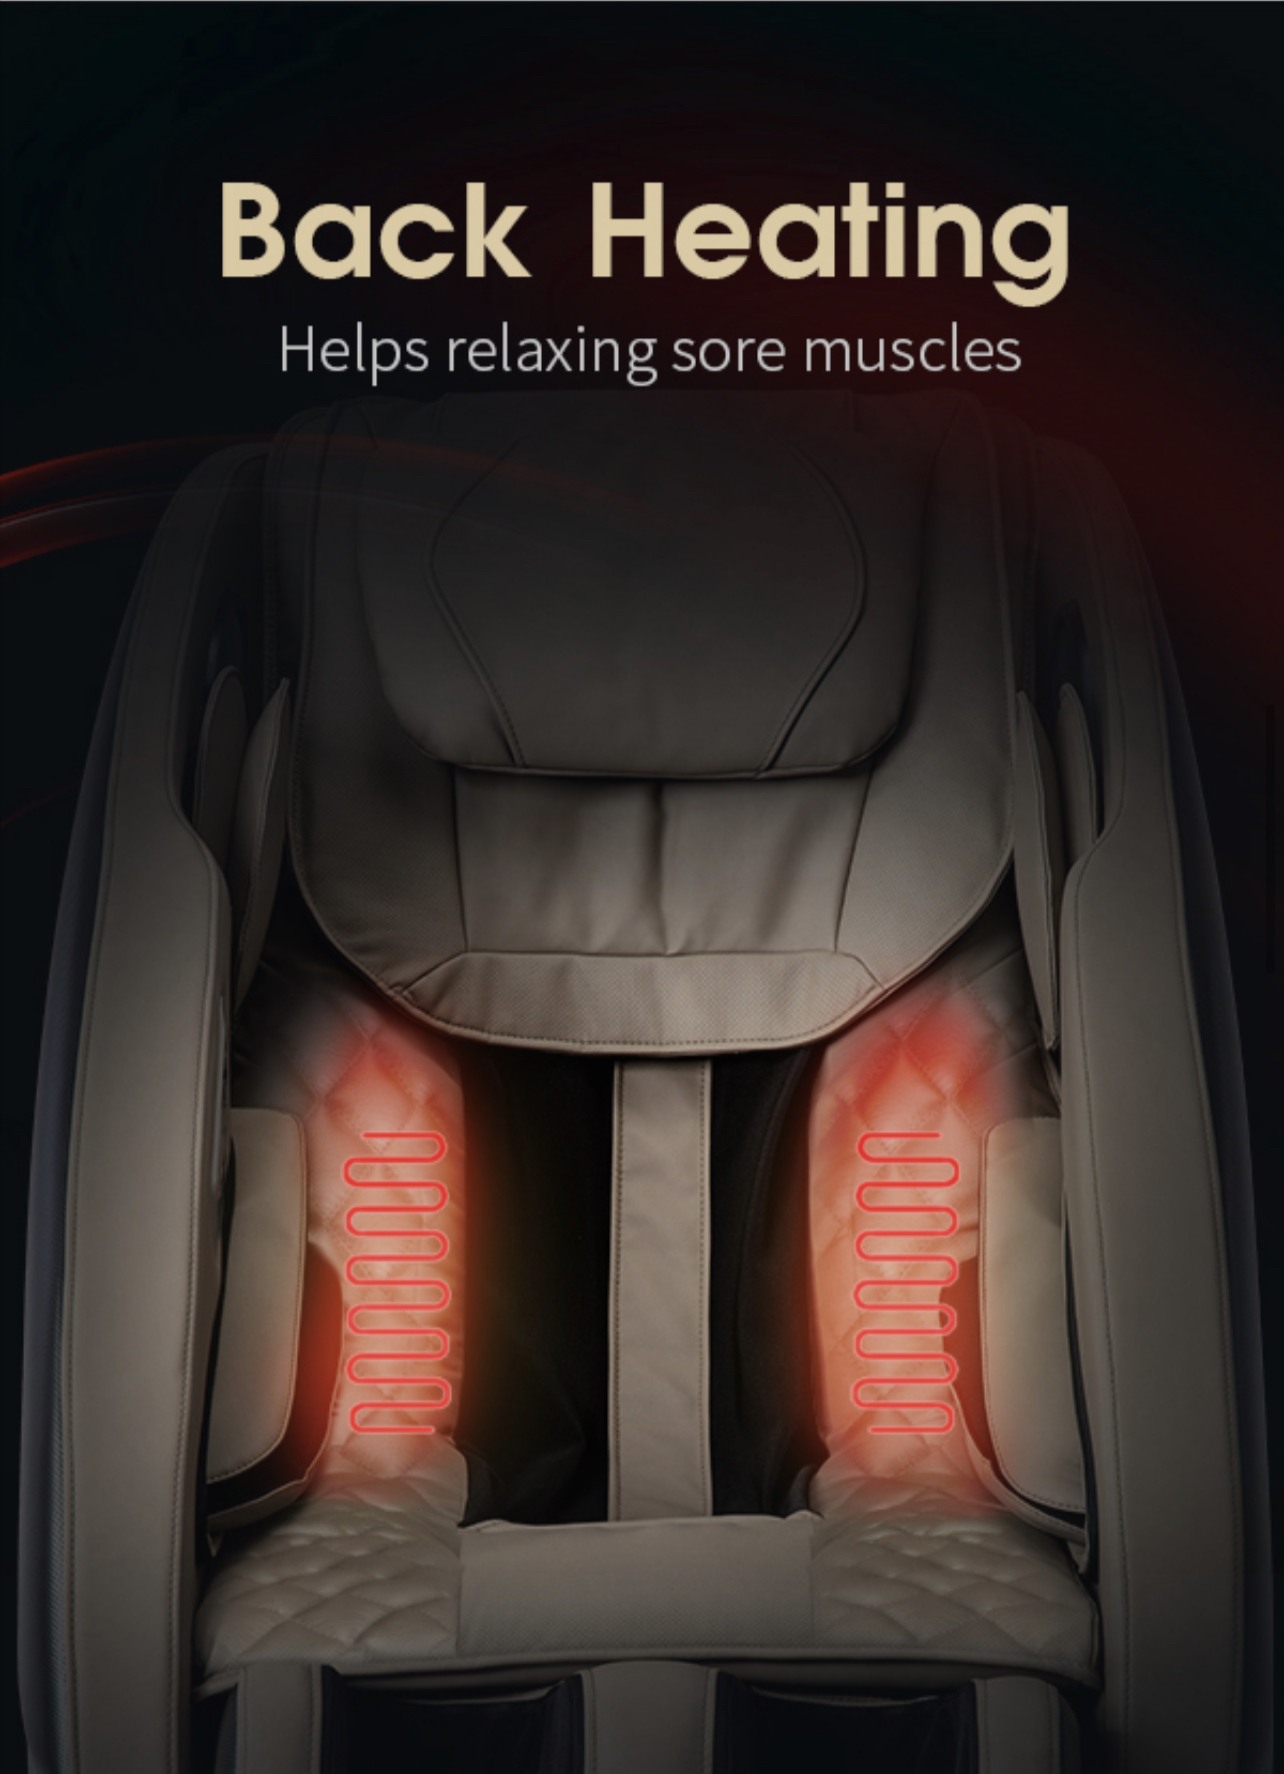 High-quality thermal seat heating to improve the massage experience